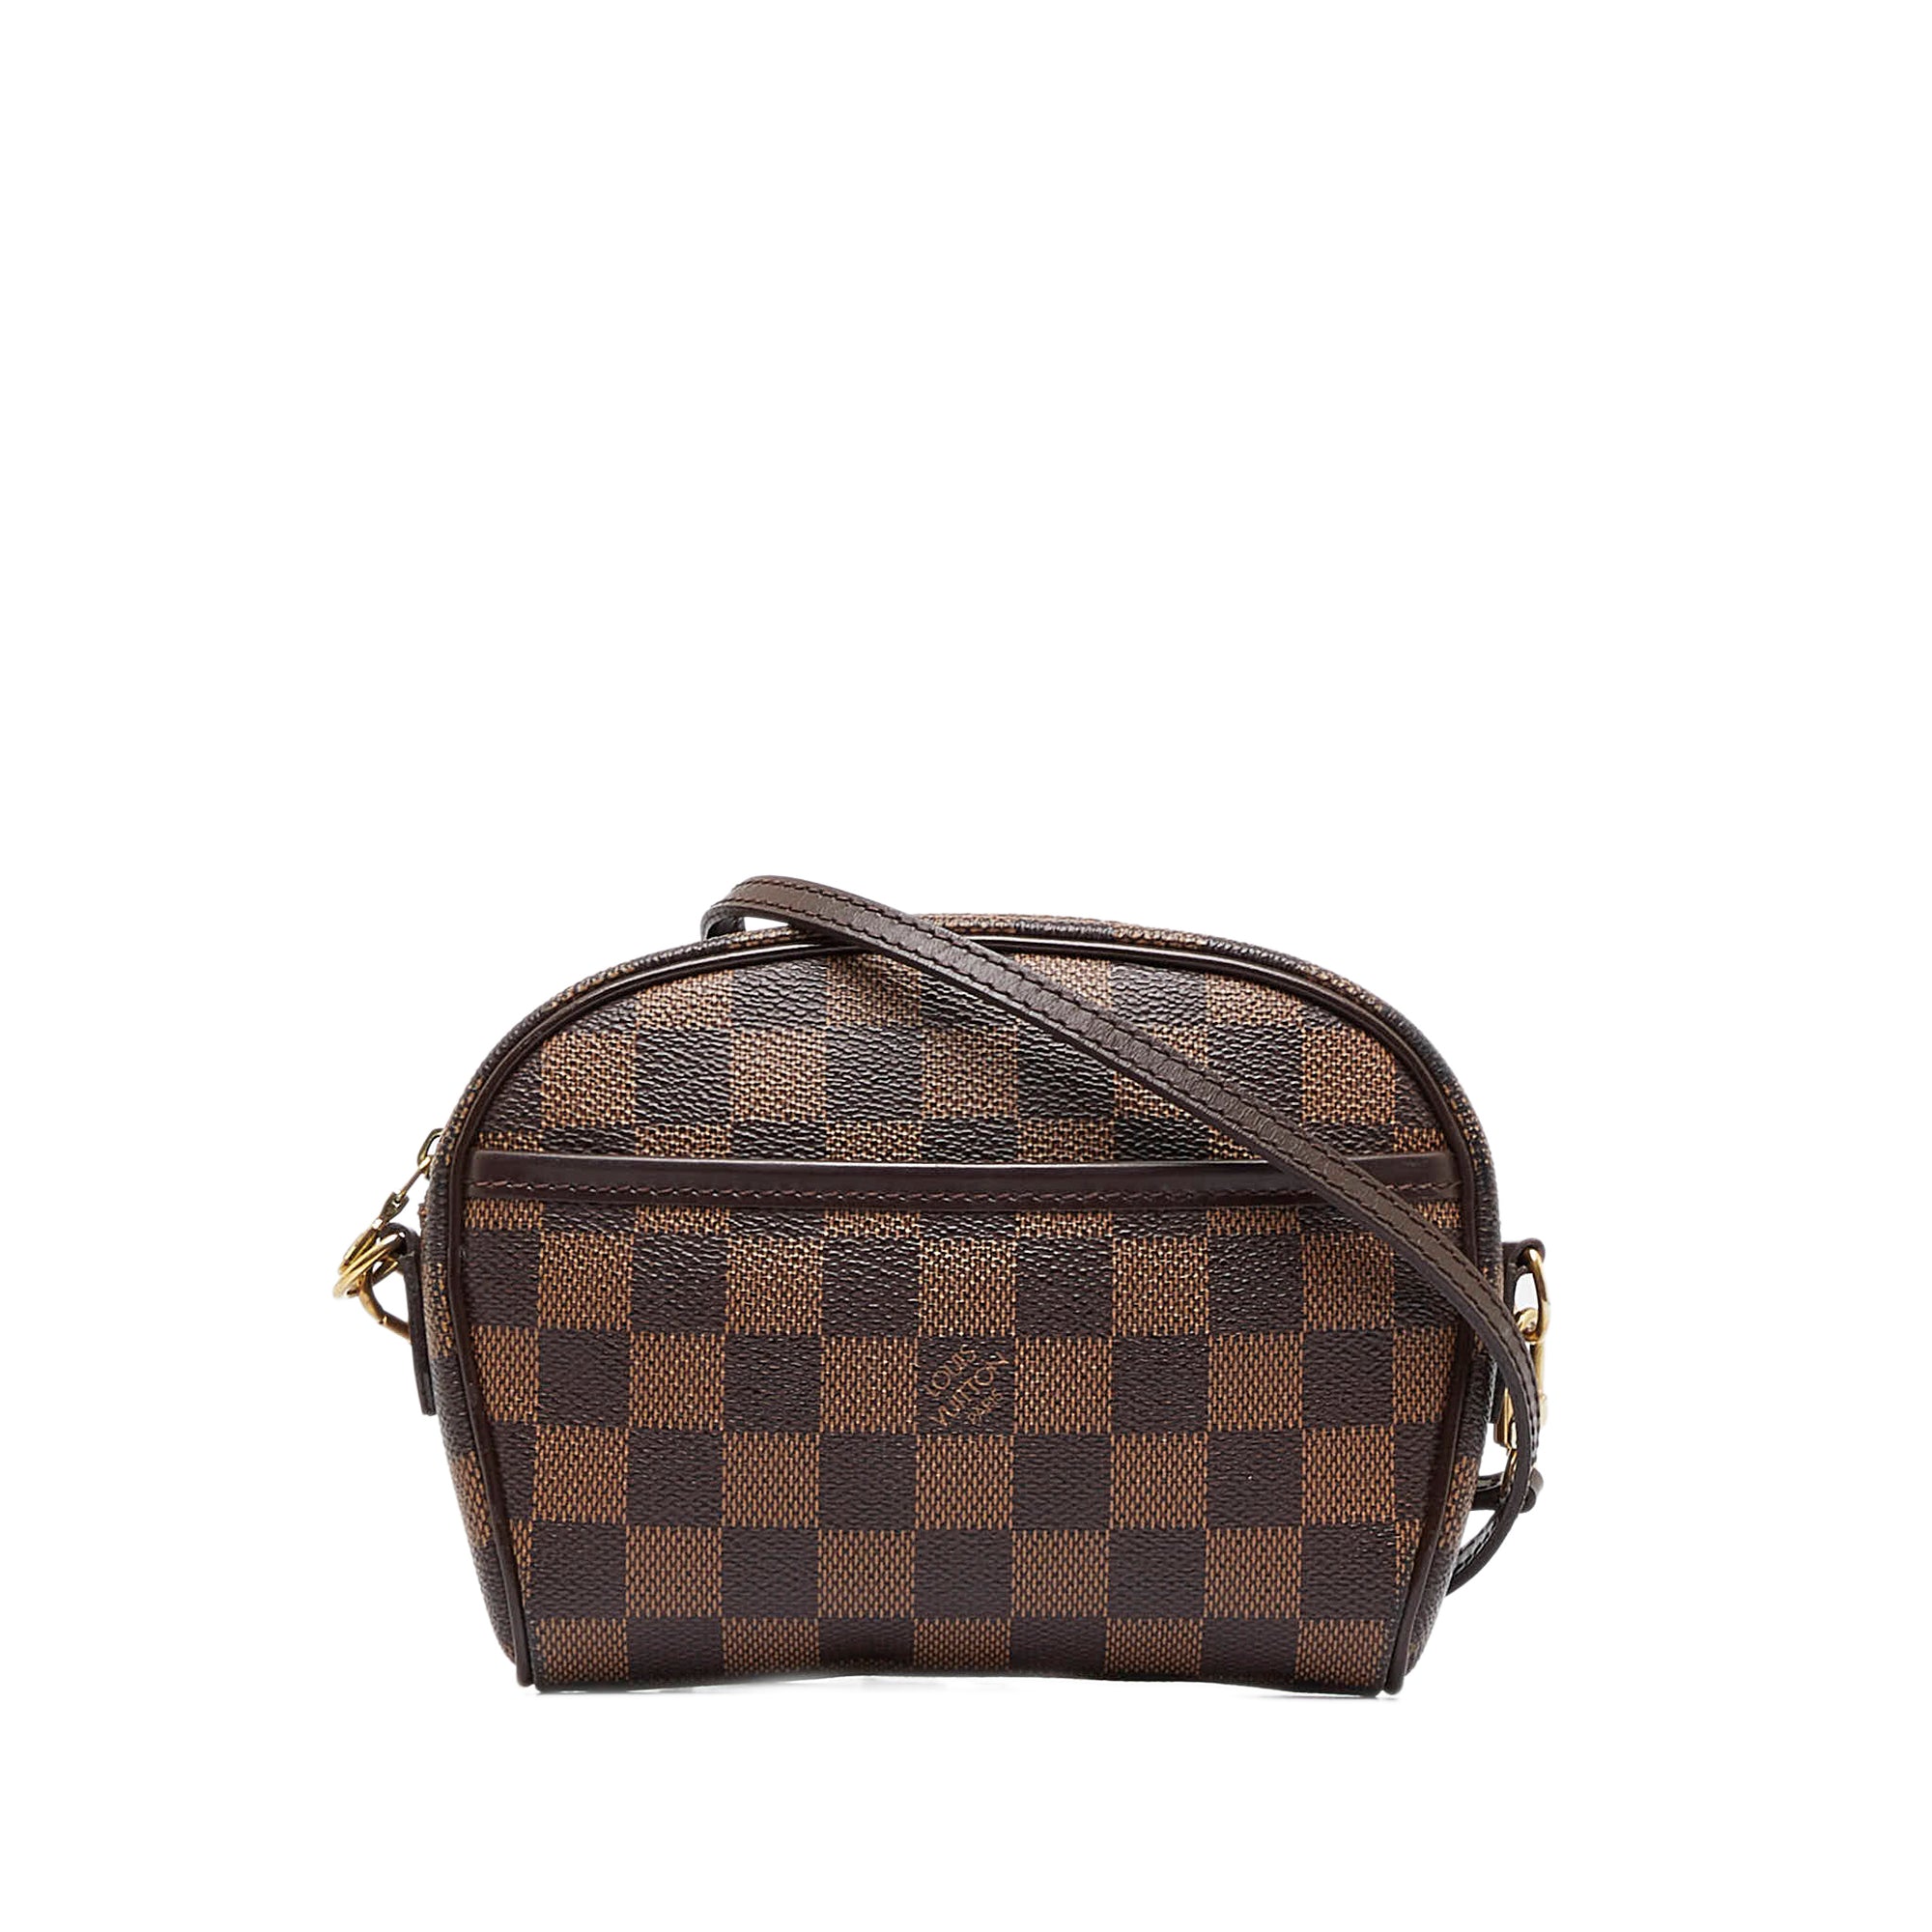 louis vuitton bag in ebene damier canvas and brown leather